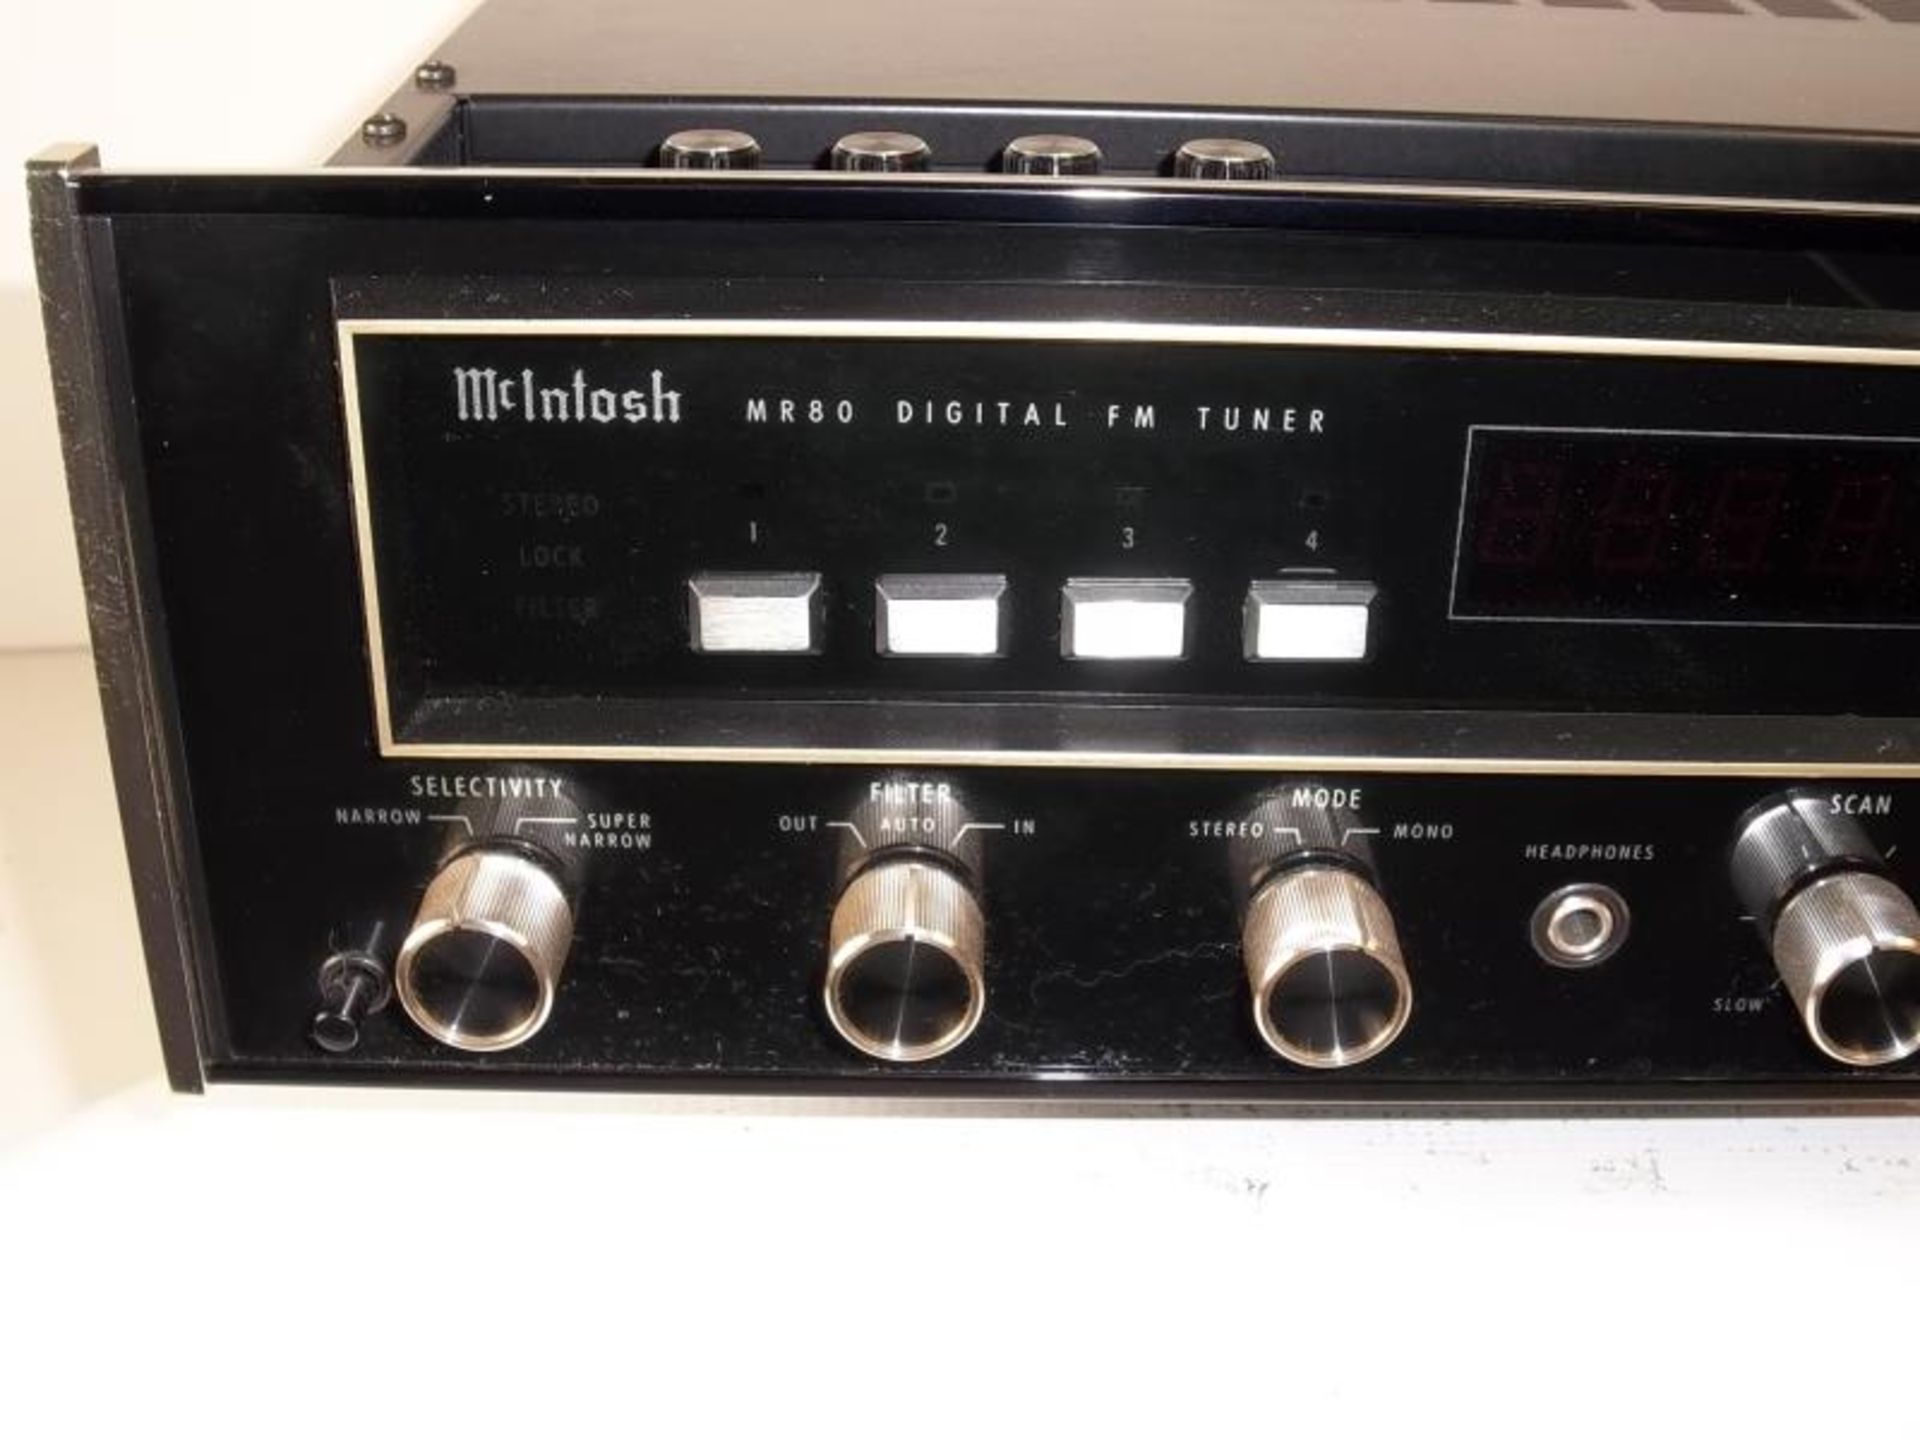 McIntosh MR 80, FM Tuner, no case, s # CK3425, tested - powers up - Image 2 of 7